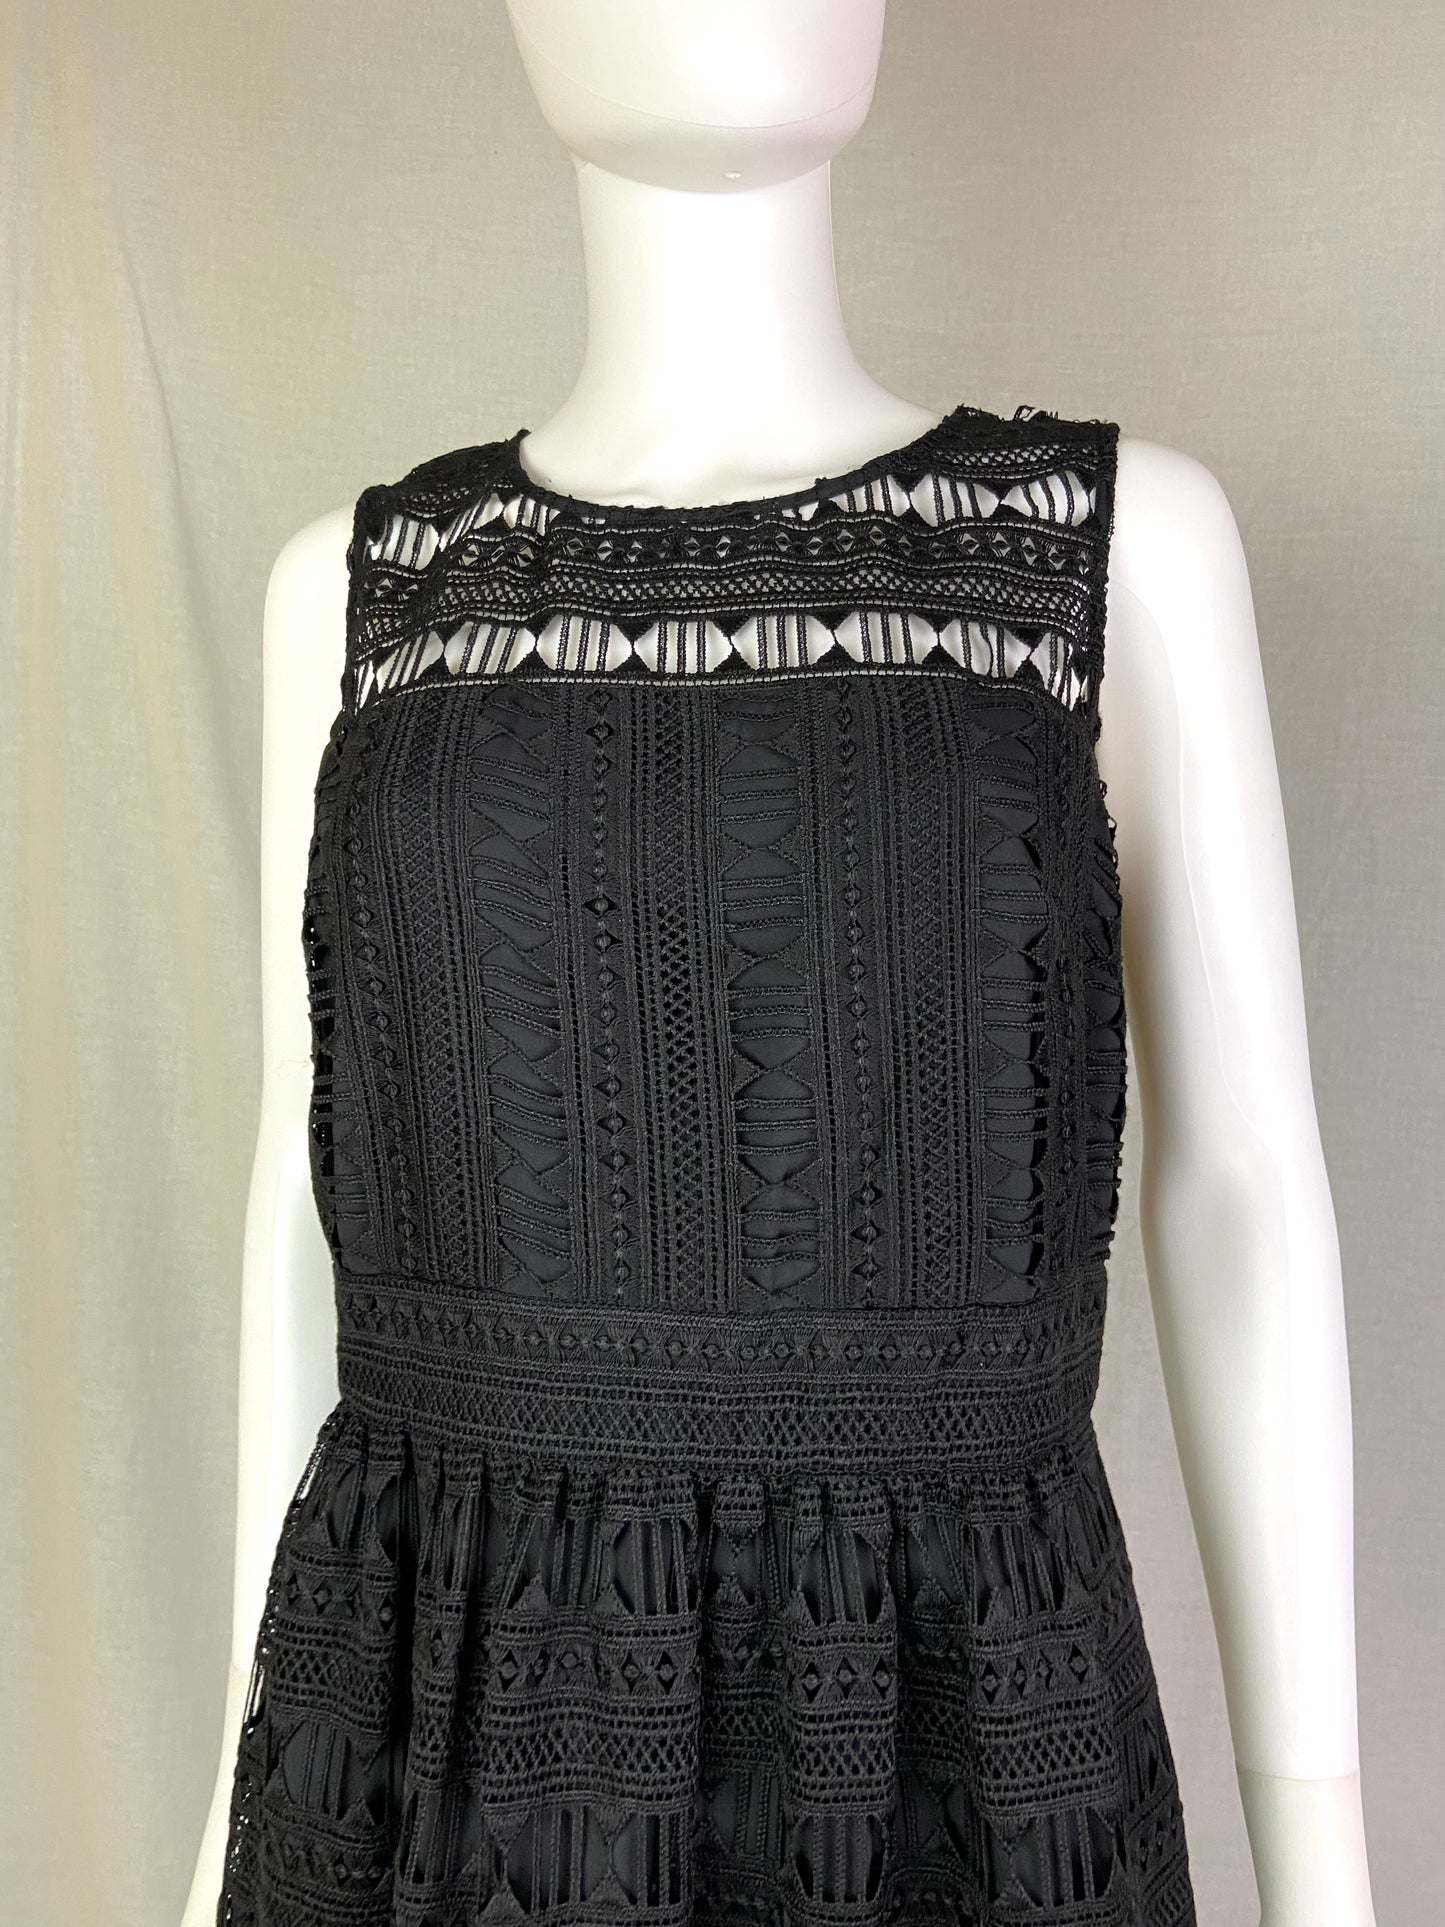 Nicole Miller Black Lace Woven Dress NWT